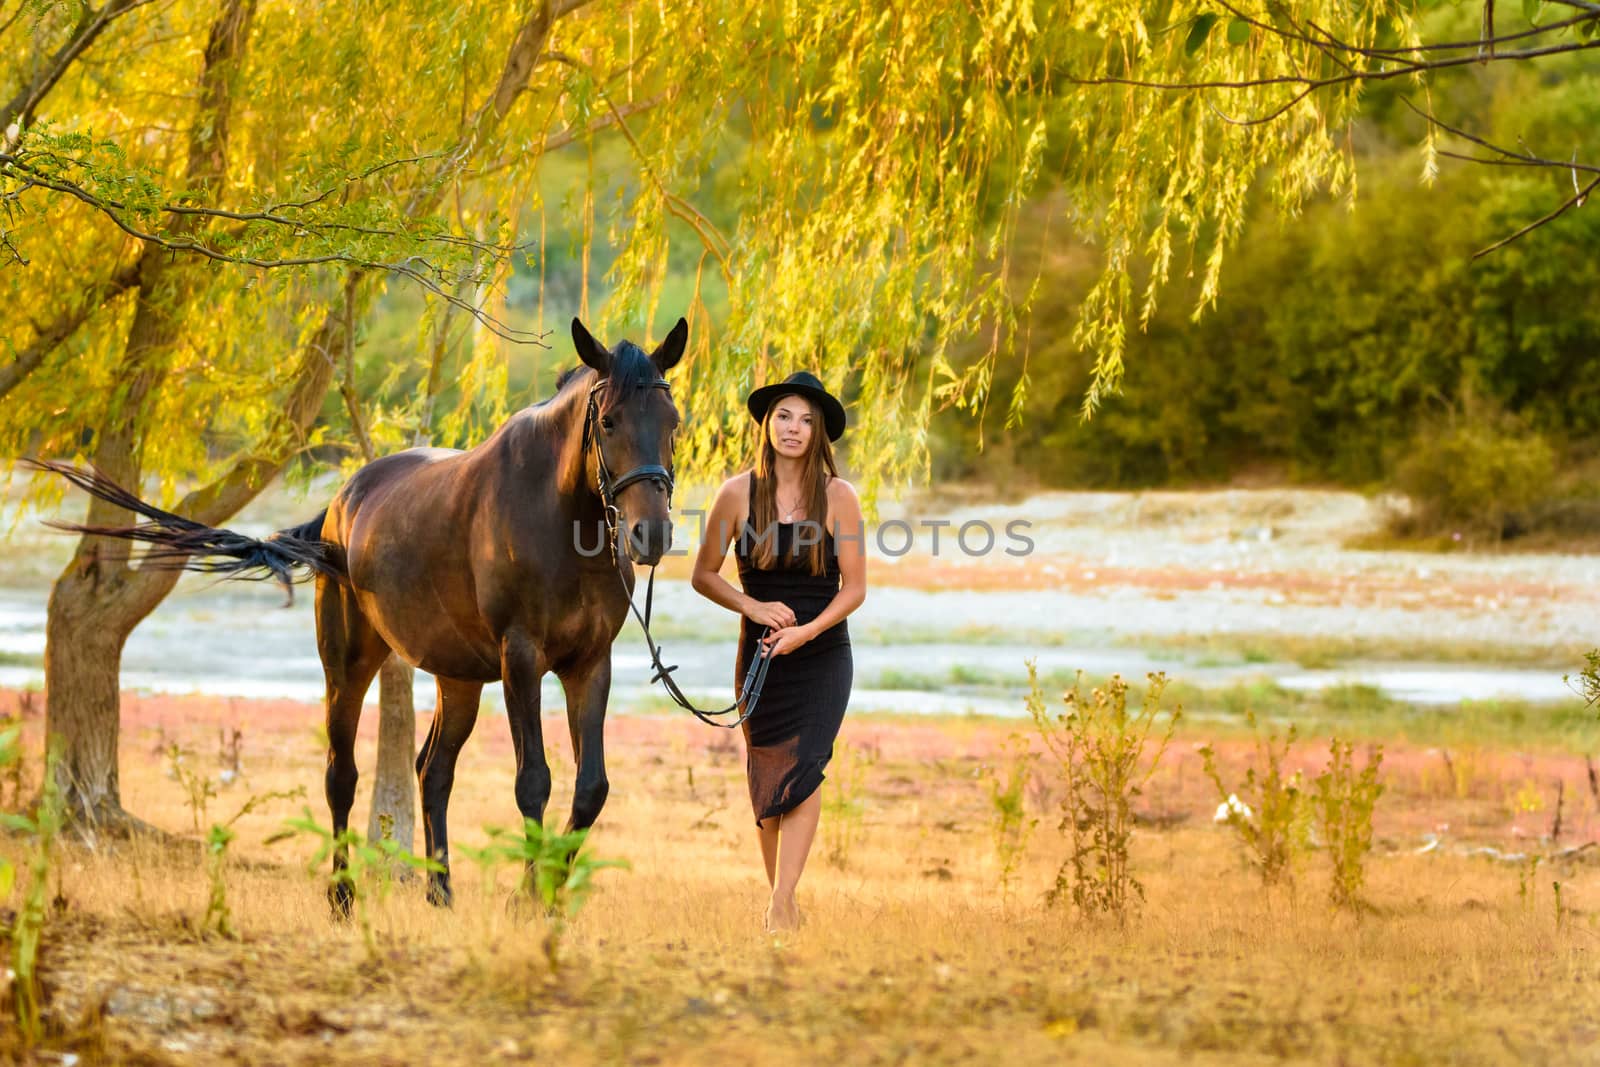 A girl in a beautiful black dress and a black hat walks with a horse across the field